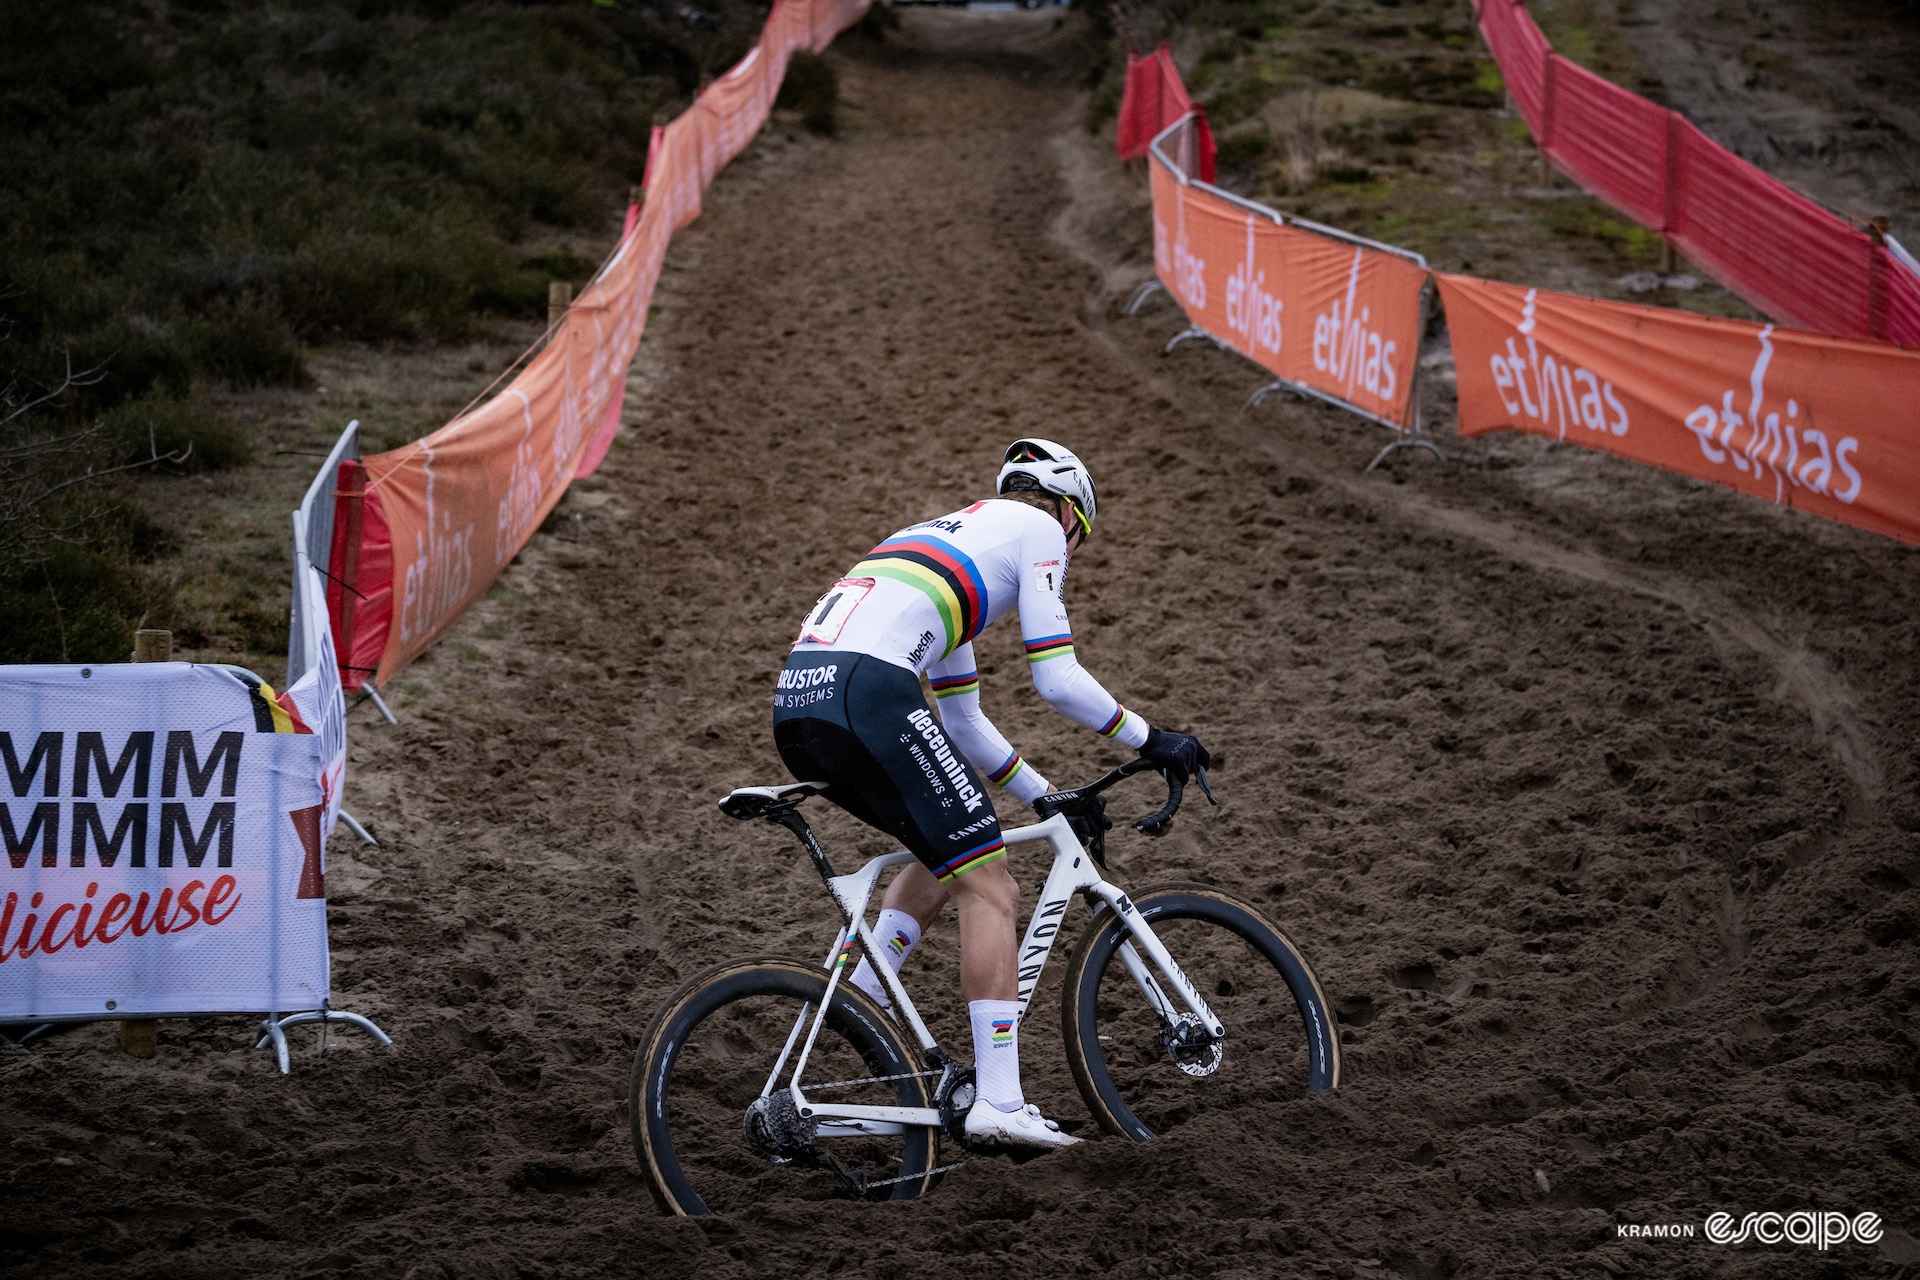 CX world champion Mathieu van der Poel leads the race solo during UCI World Cup Zonhoven.